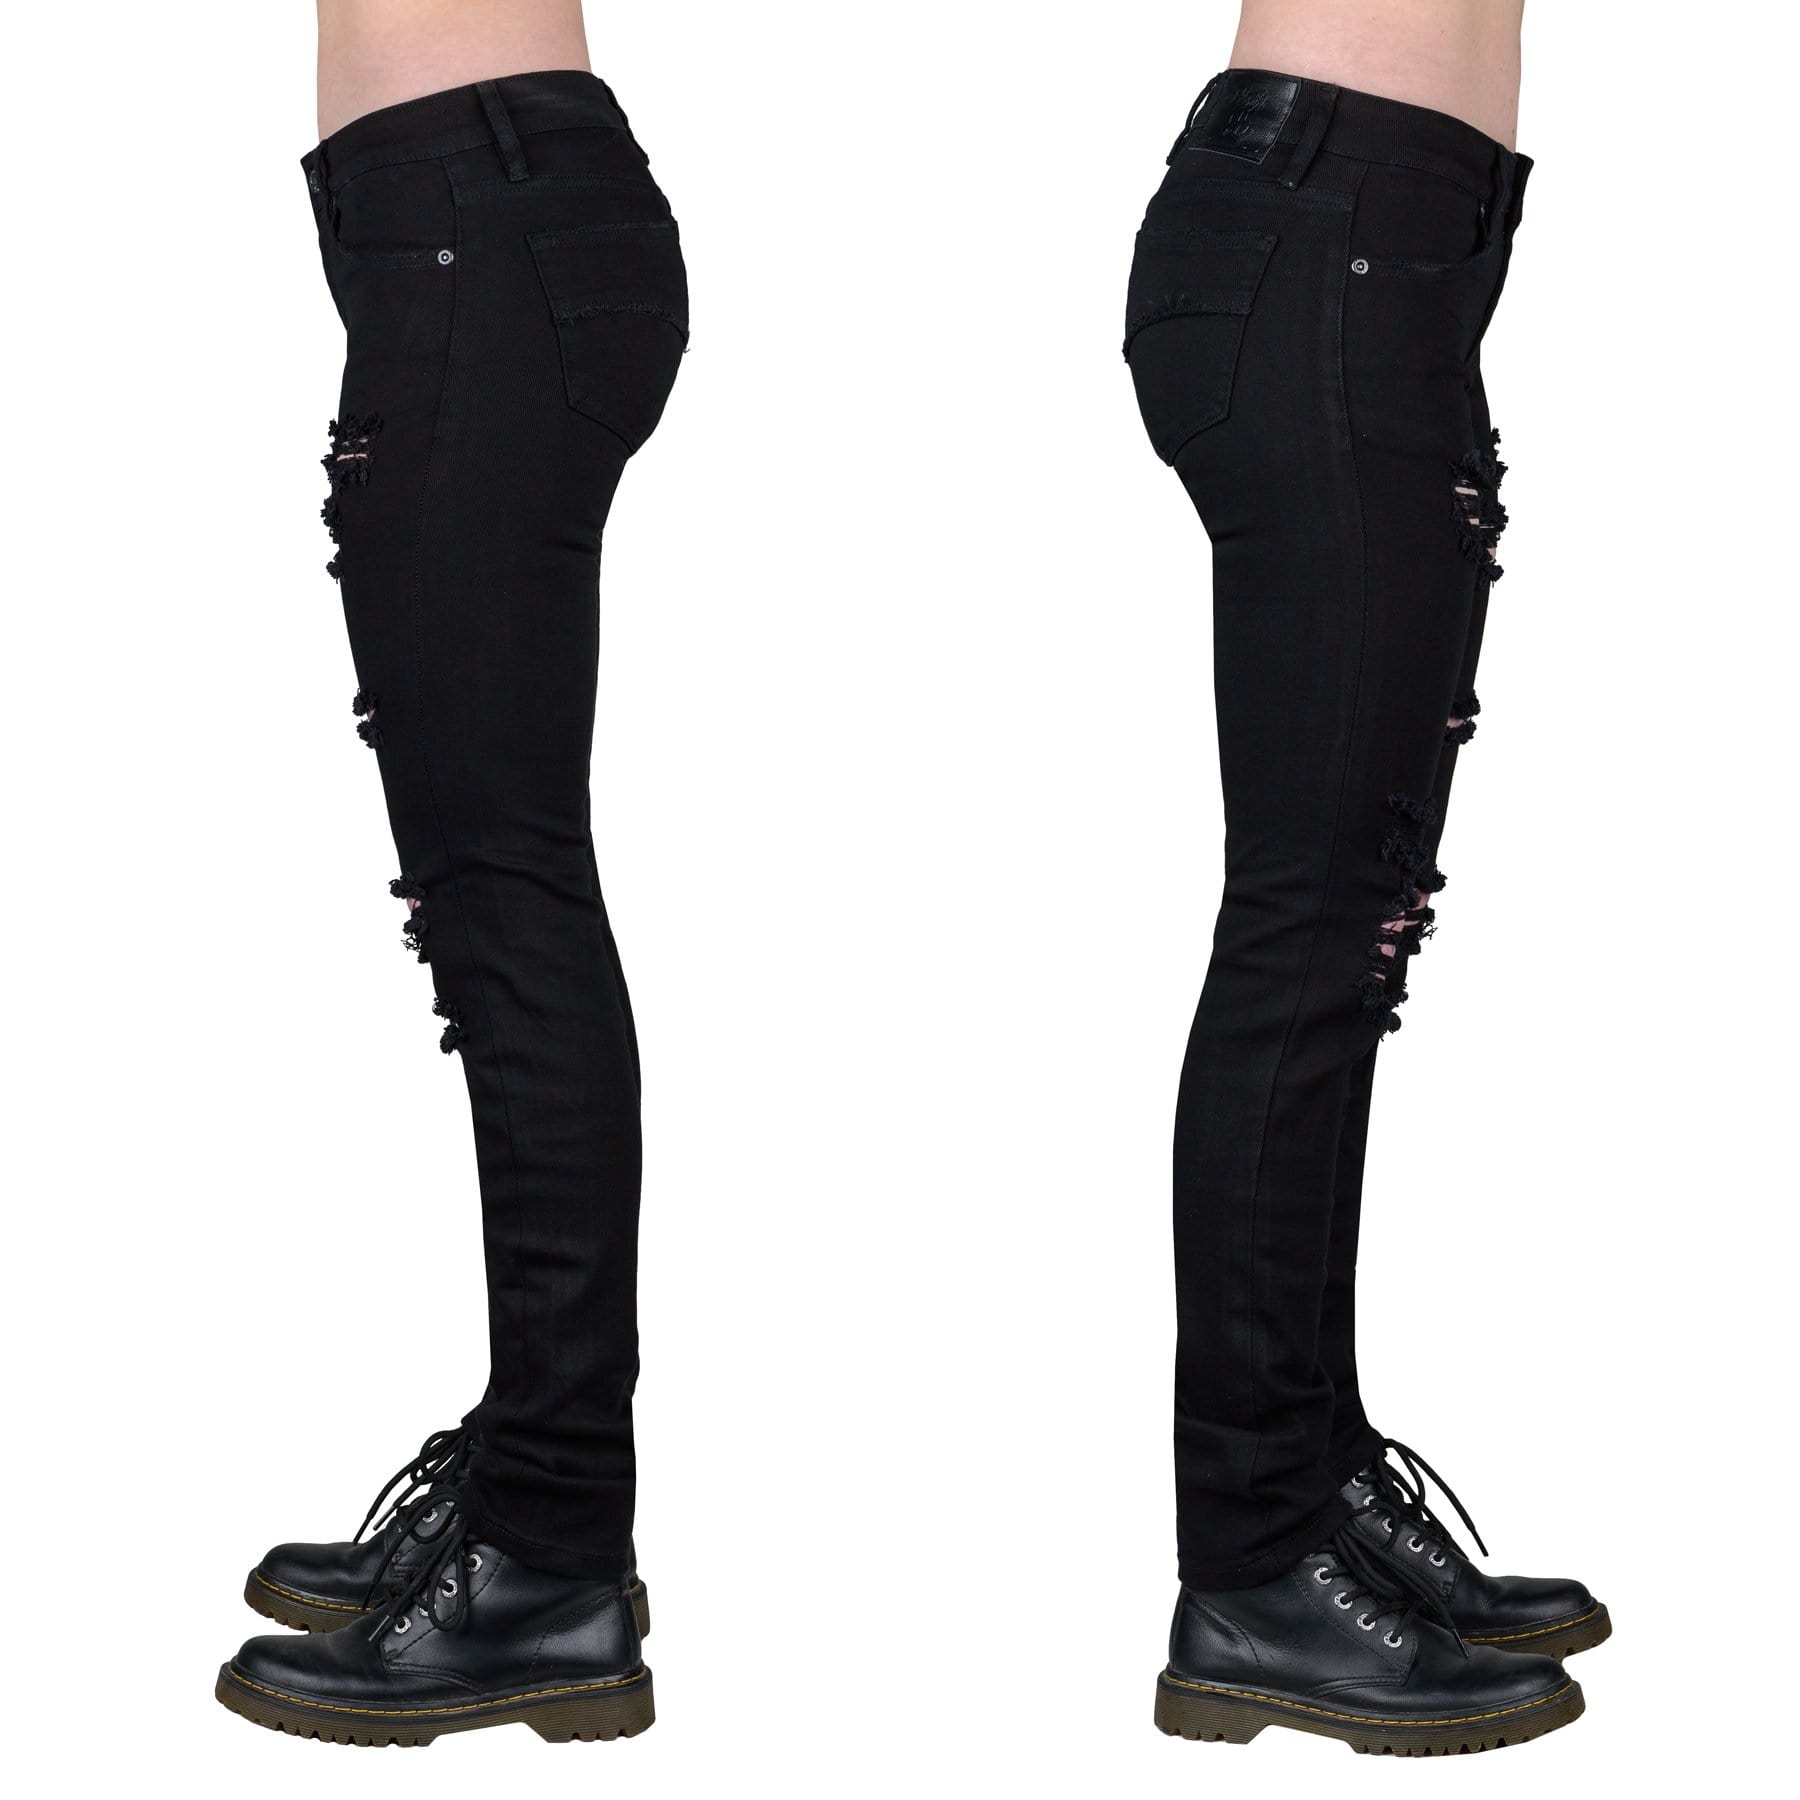 Essentials Collection Pants Rampager Shredded Unisex Jeans - Black